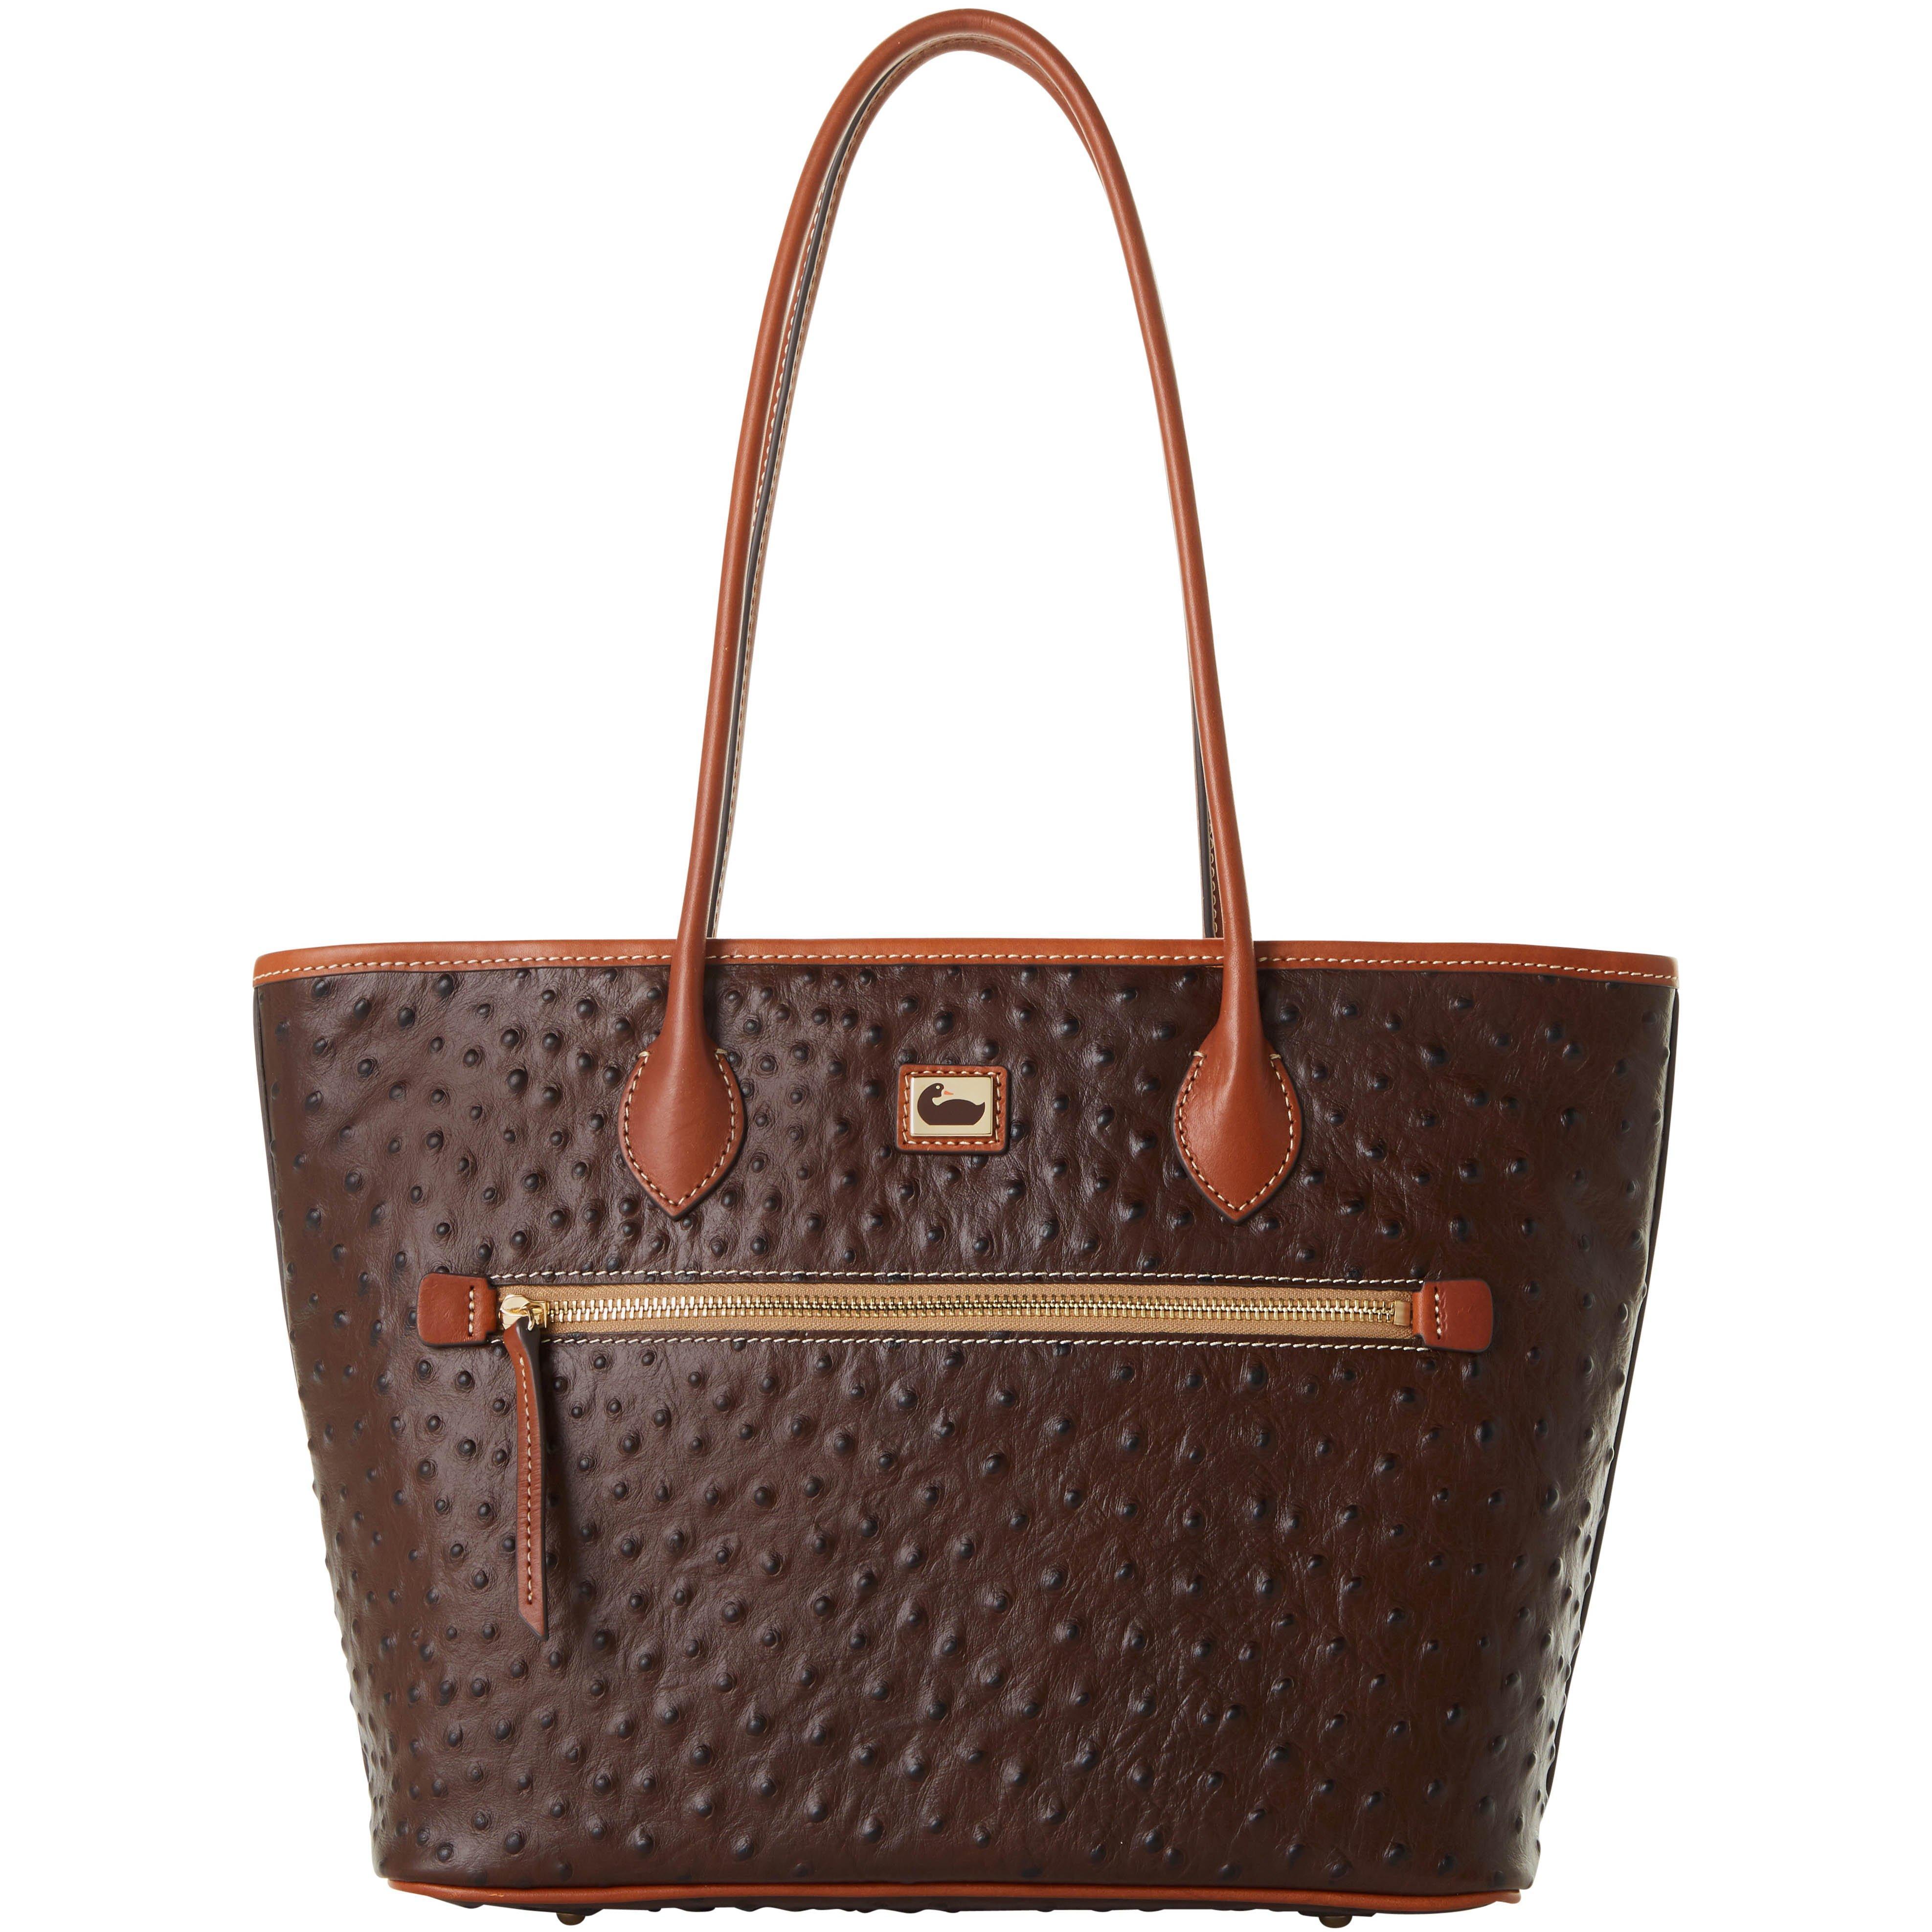 Dooney & Bourke Ostrich Tote in Light Taupe (Brown) - Lyst